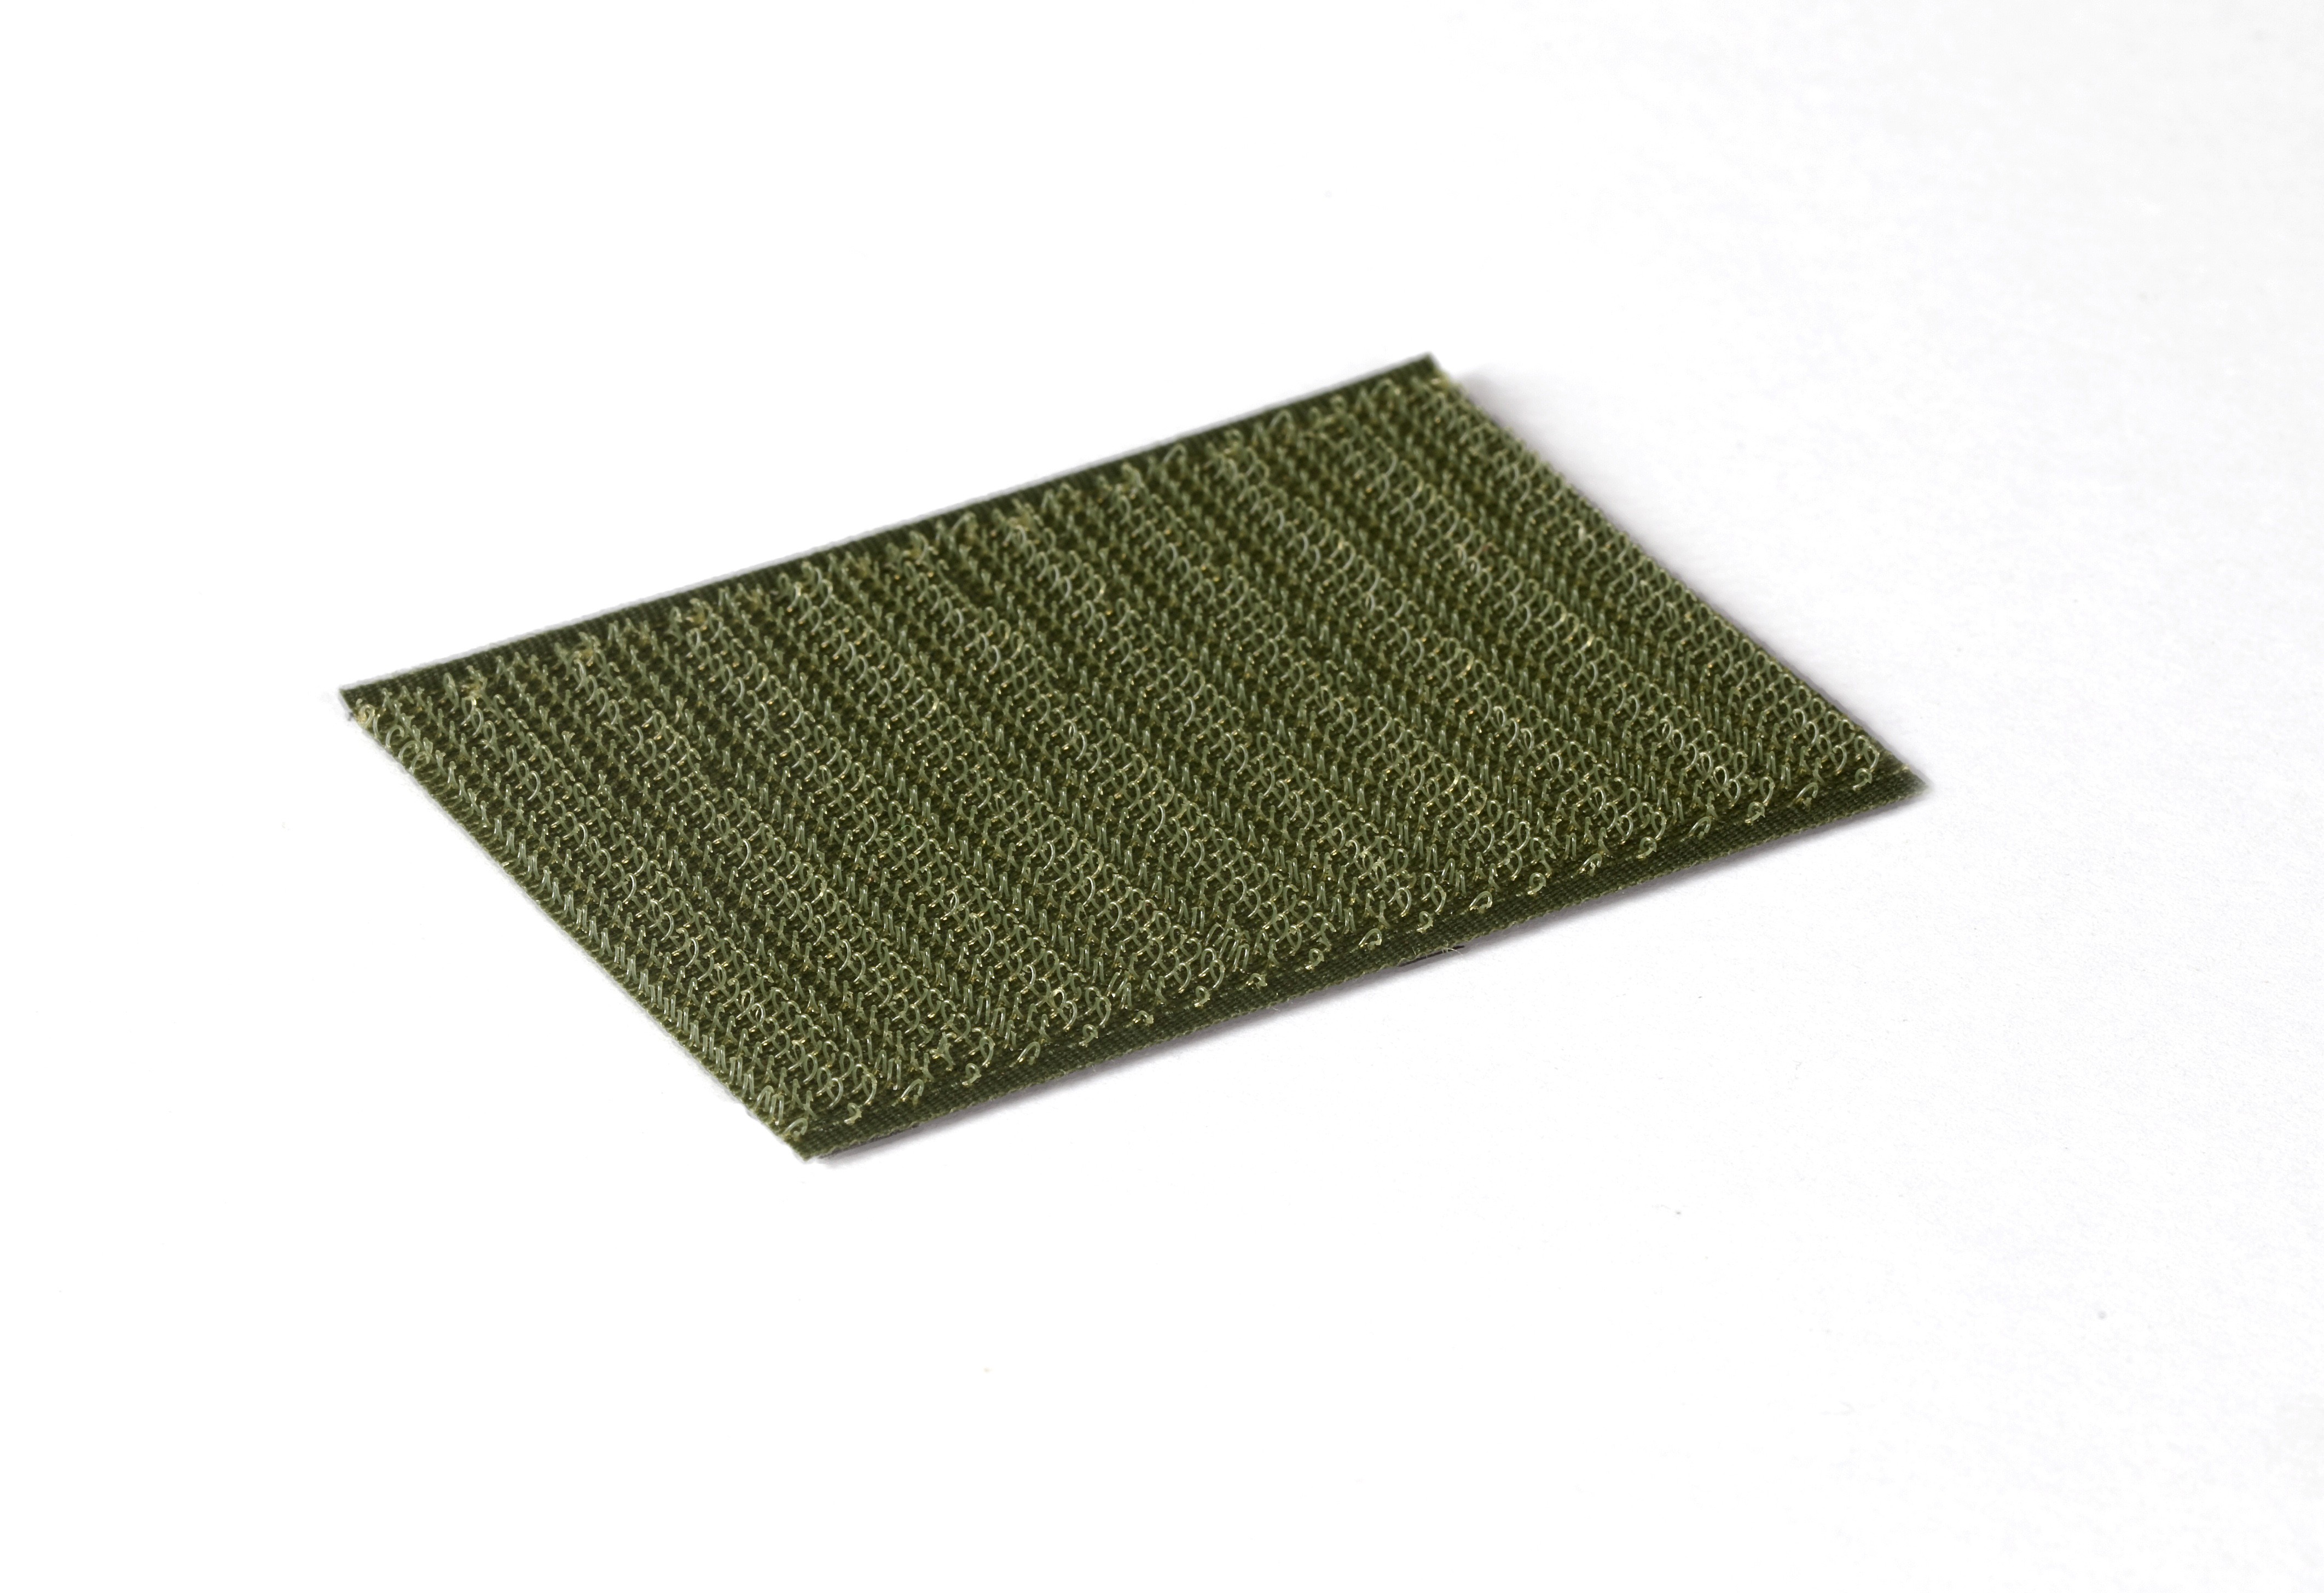 2 OLIVE DRAB VELCRO® BRAND HOOK - SEW ON  Full Line of VELCRO® Products  from Textol Systems